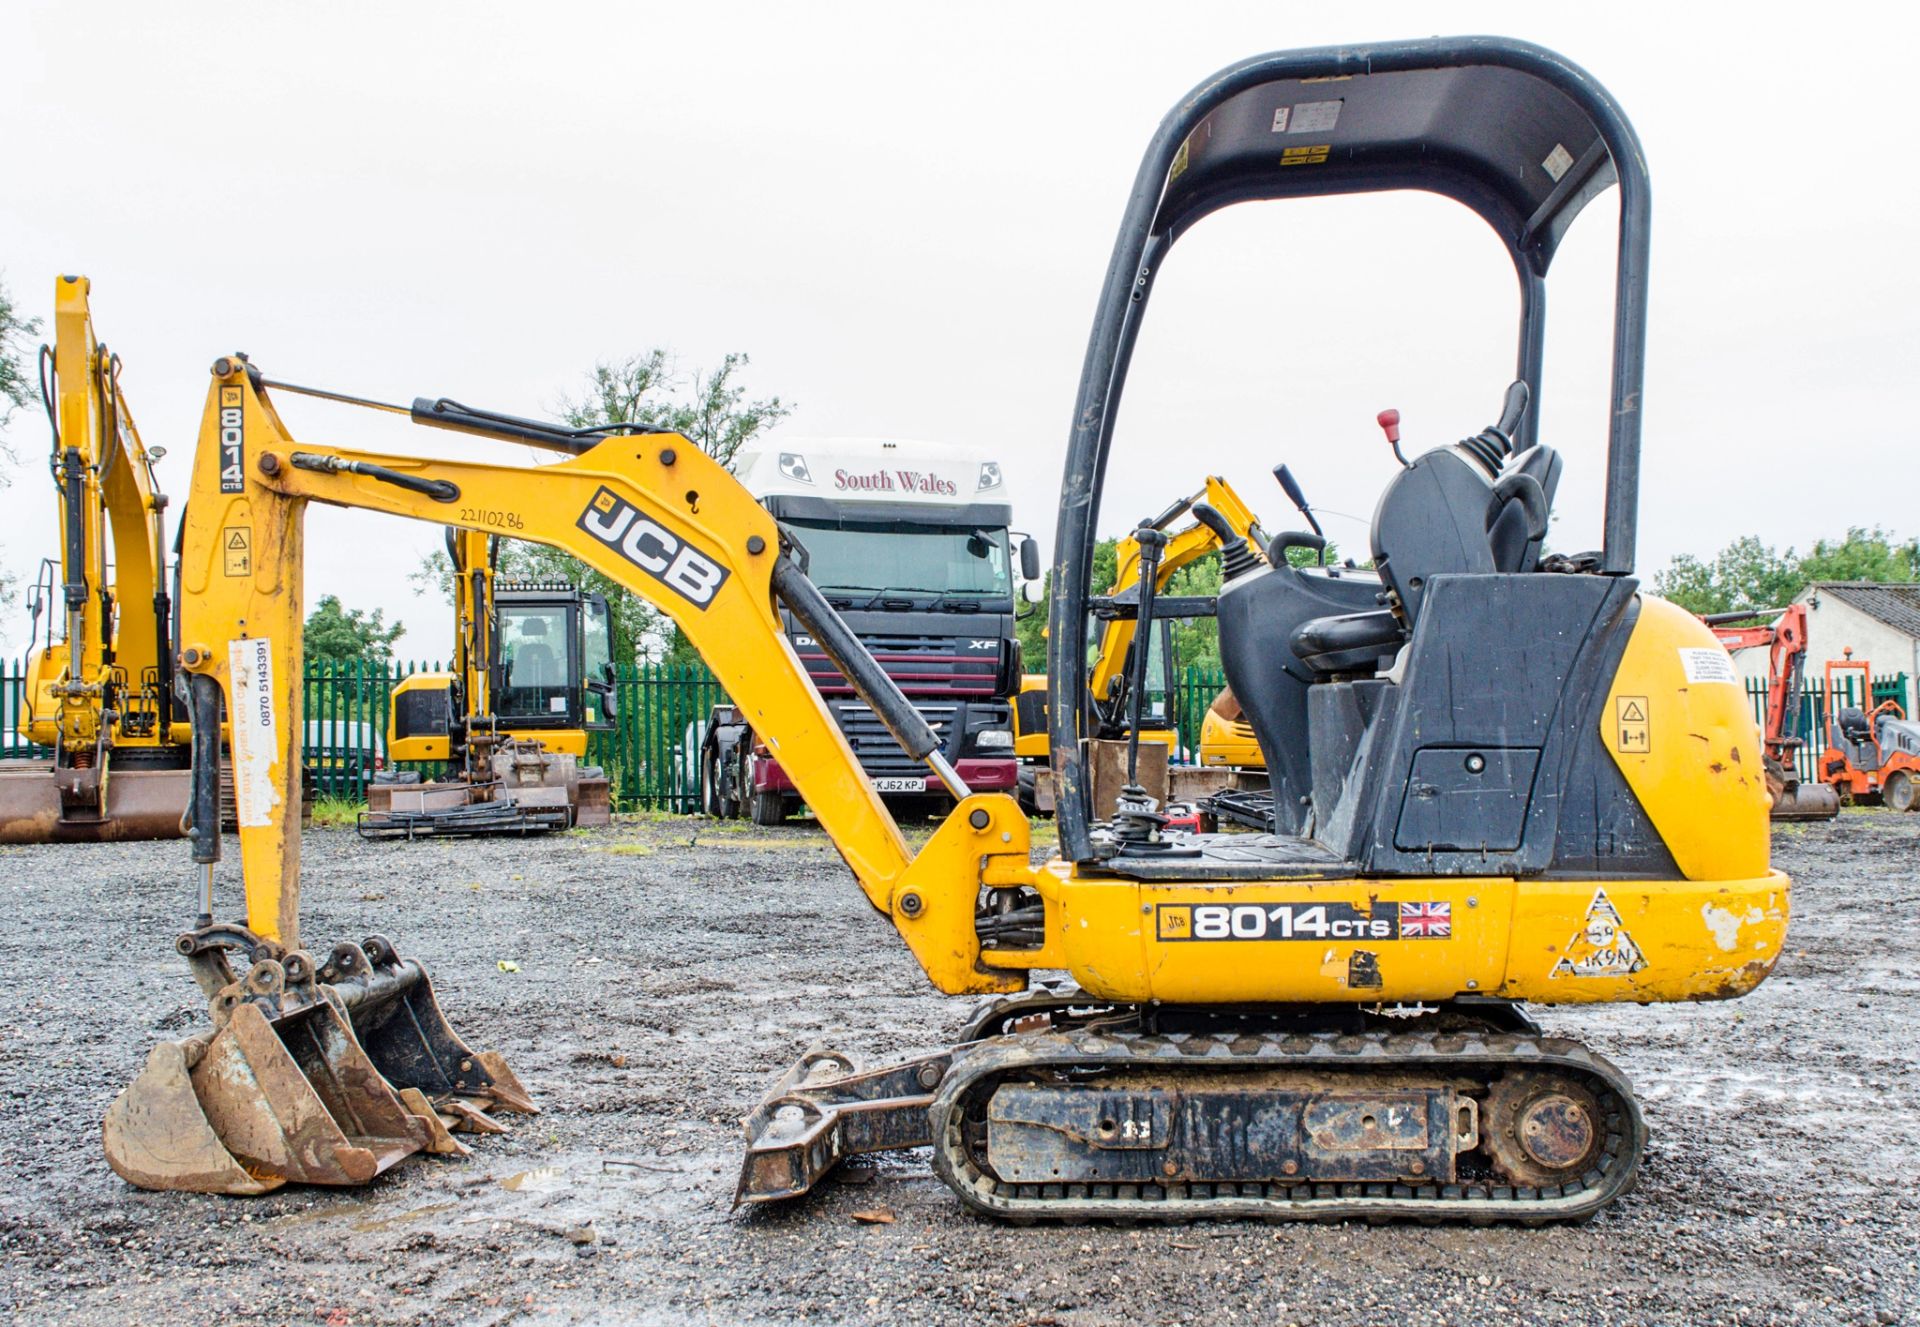 JCB 8014 CTS 1.5 tonne rubber tracked mini excavator Year: 2014 S/N: 2070464 Recorded Hours: 1102 - Image 7 of 20